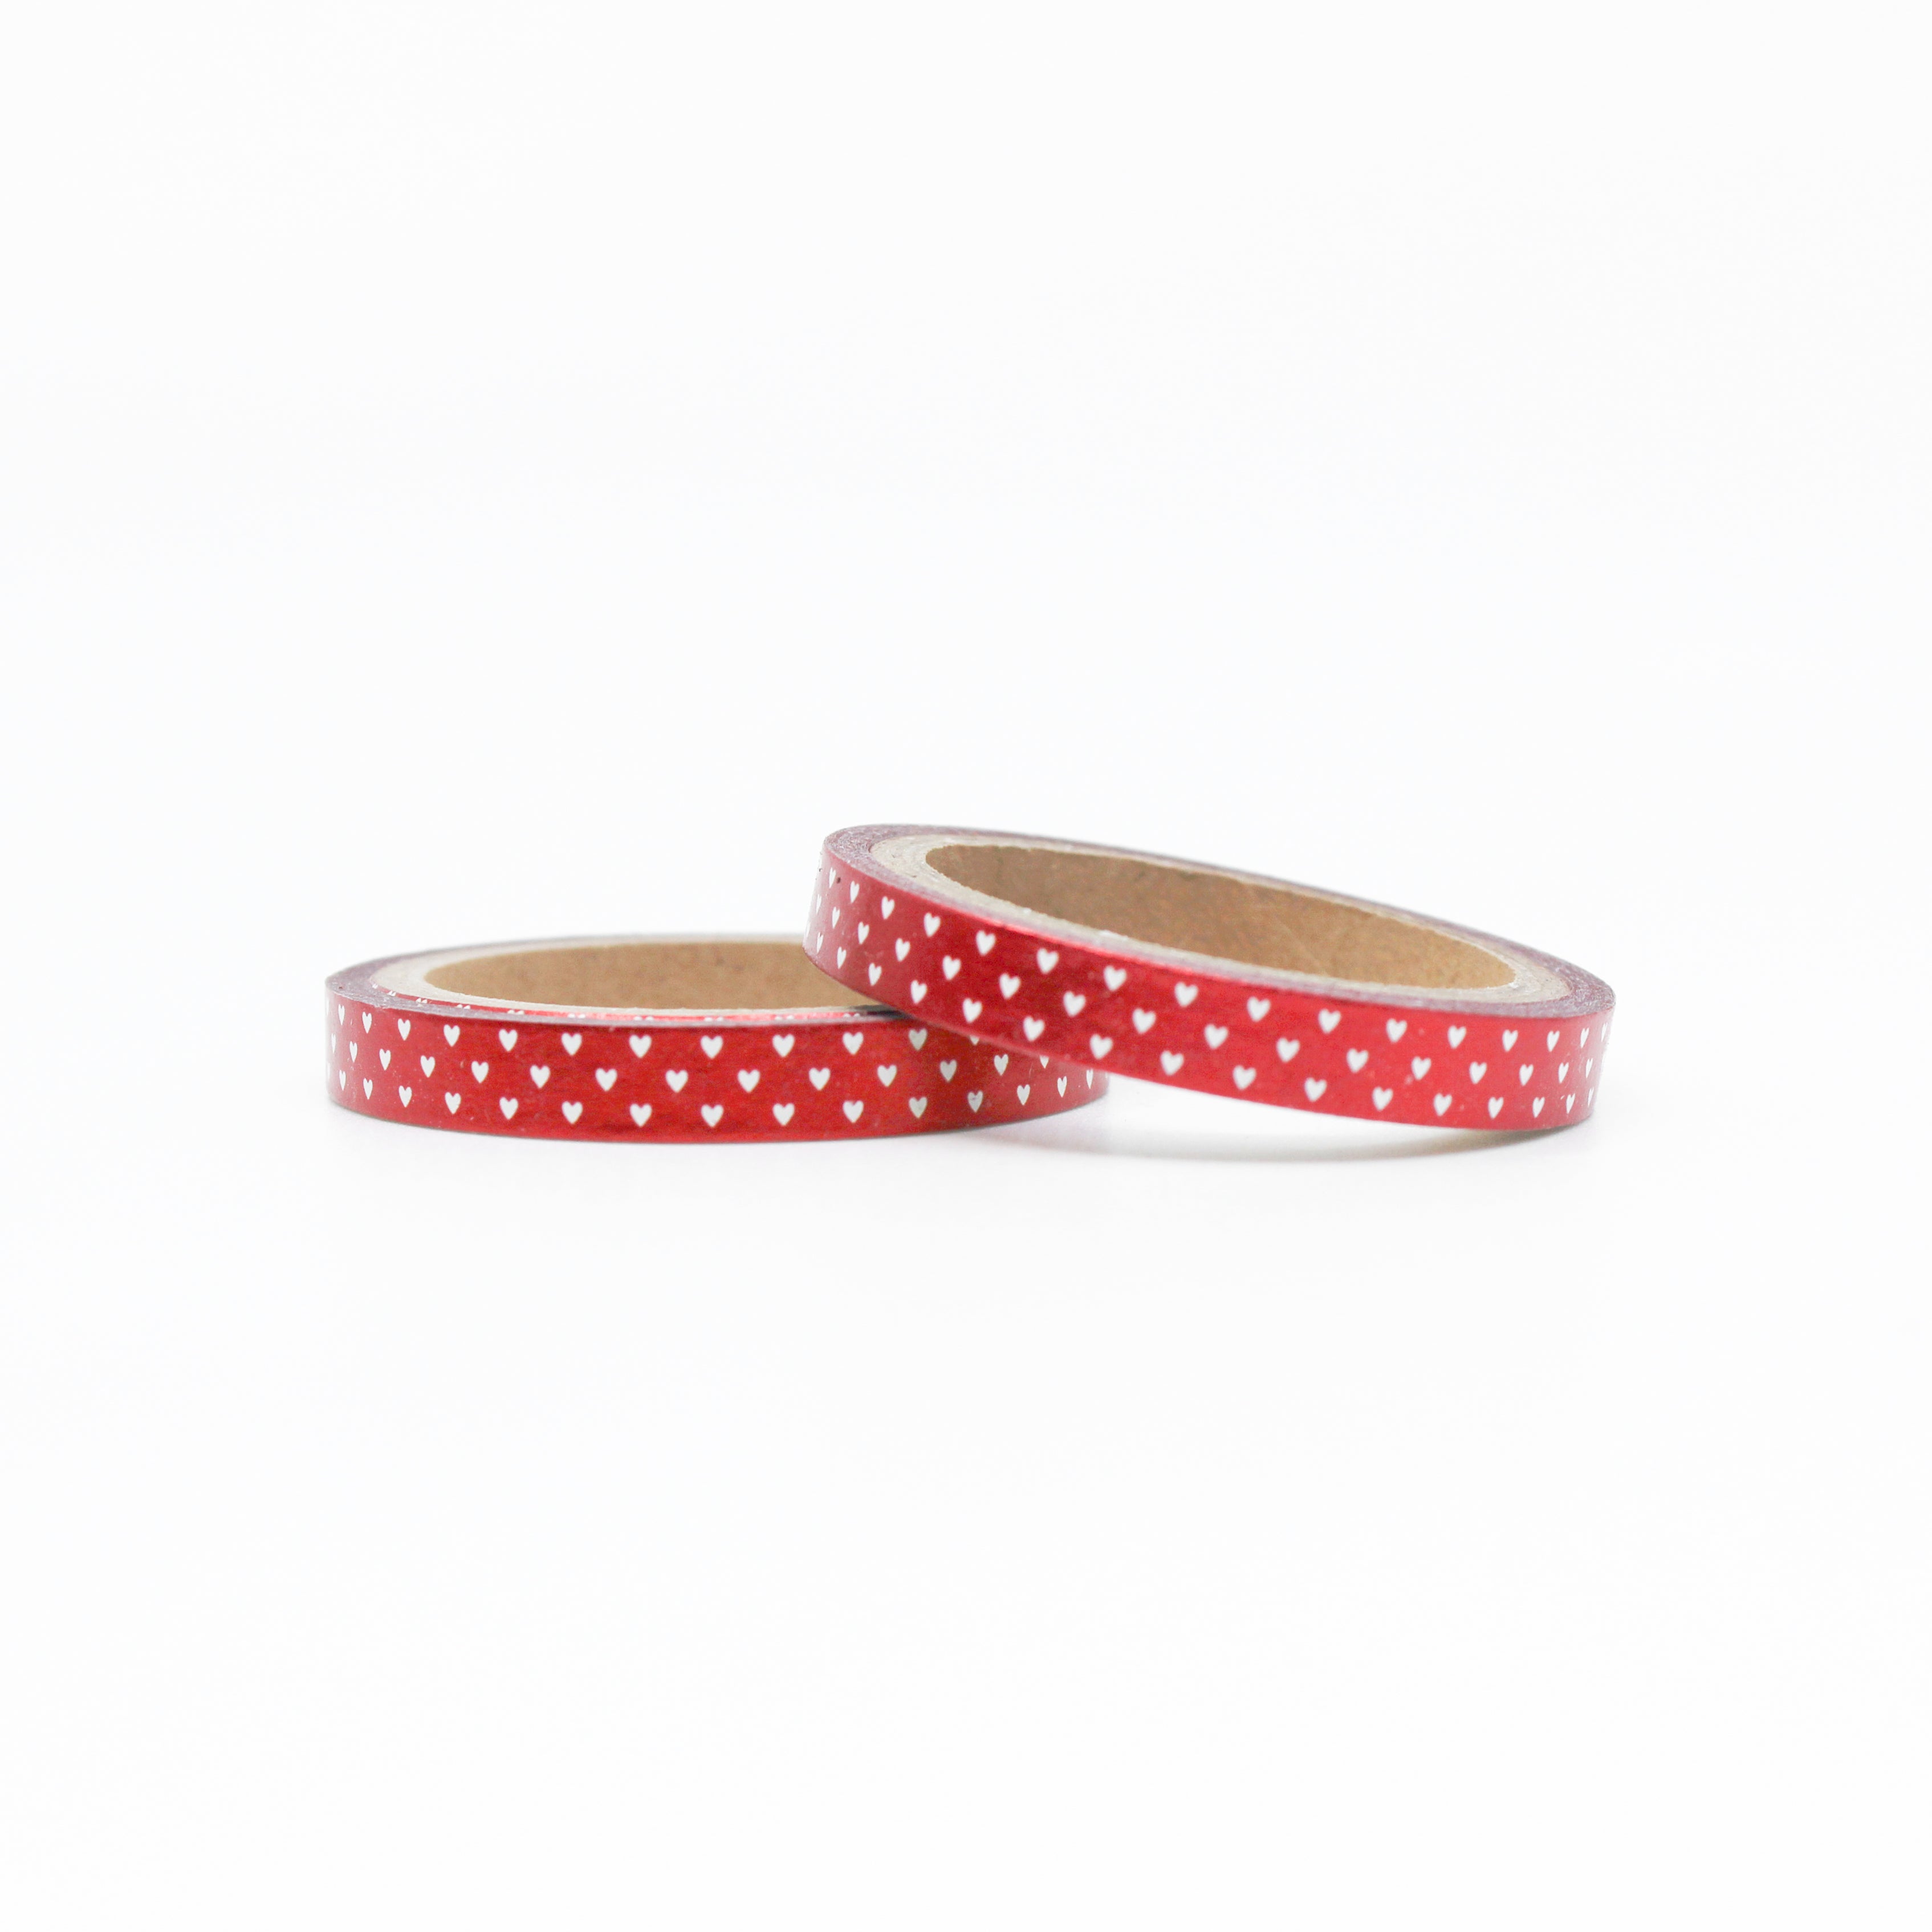 This is a roll of foil tiny hearts with red background washi tapes from BBB Supplies Craft Shop